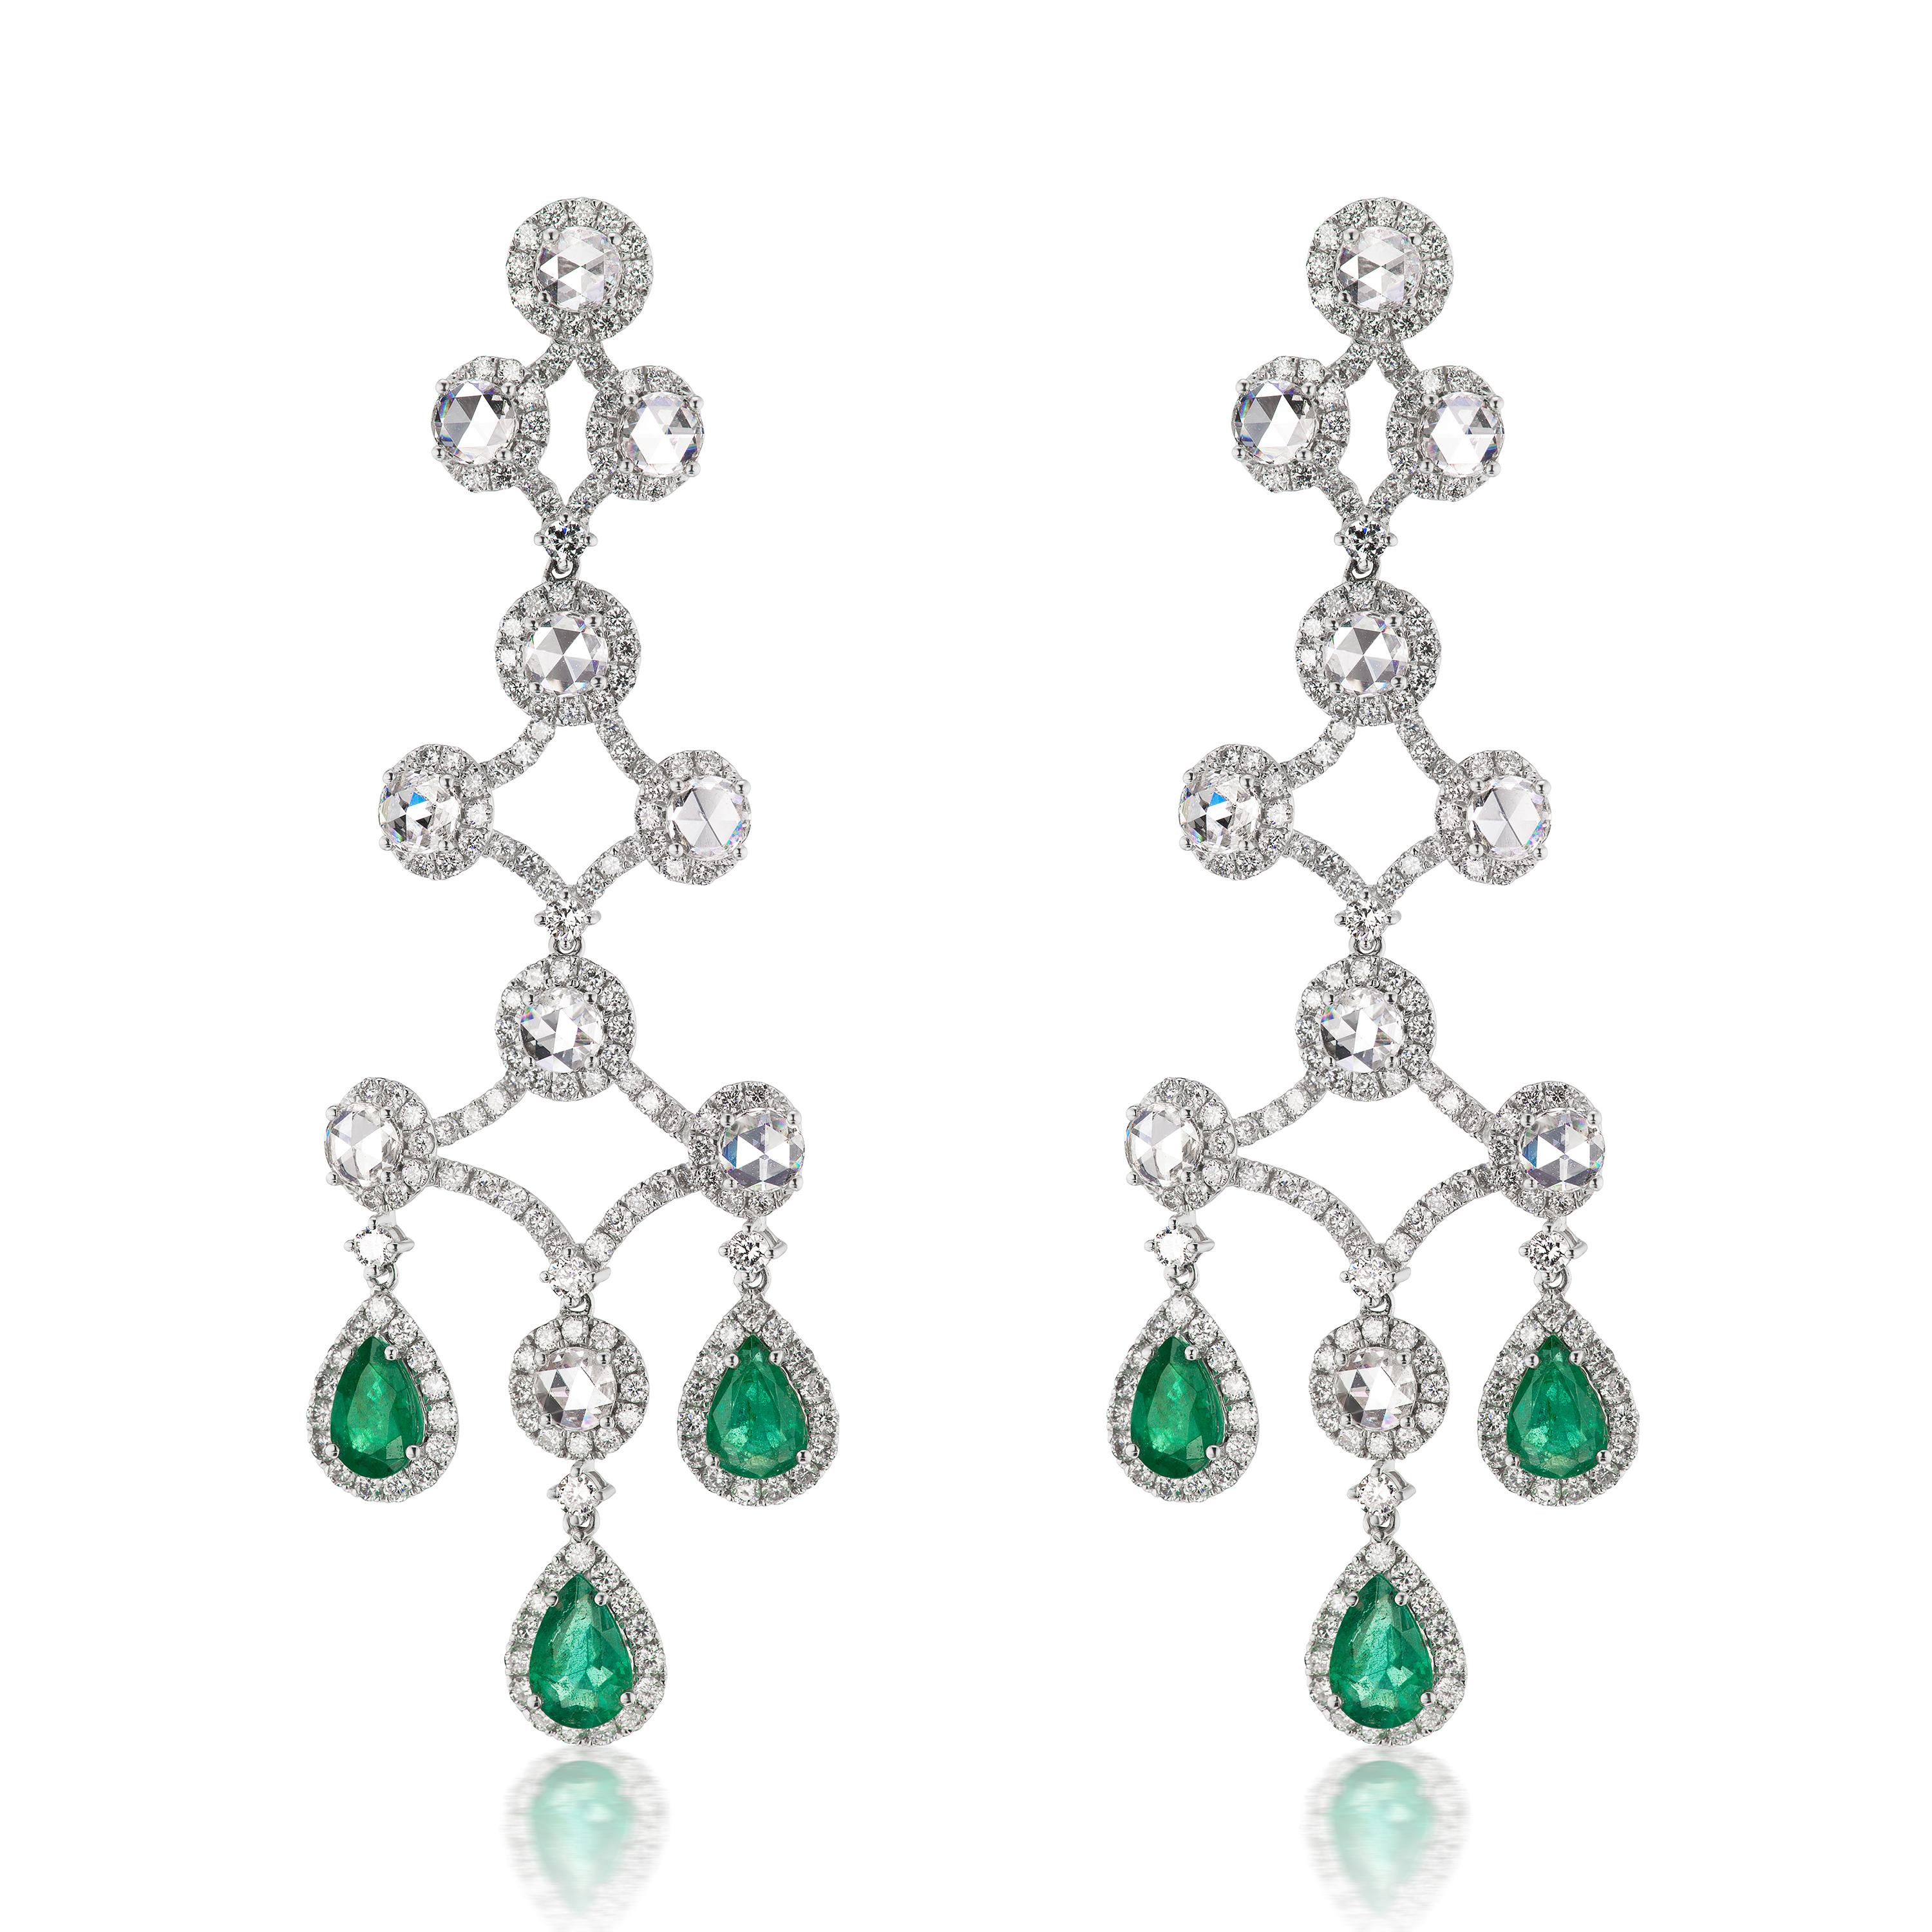 Promising you a scintillating look, these Nigaam earrings are designed by master craftsmen in 18K White Gold. Displaying a chandelier pattern, this pair is set with 8.38 Cts diamonds and 3.85 Cts pear-shaped Emeralds dropping down at the bottom.